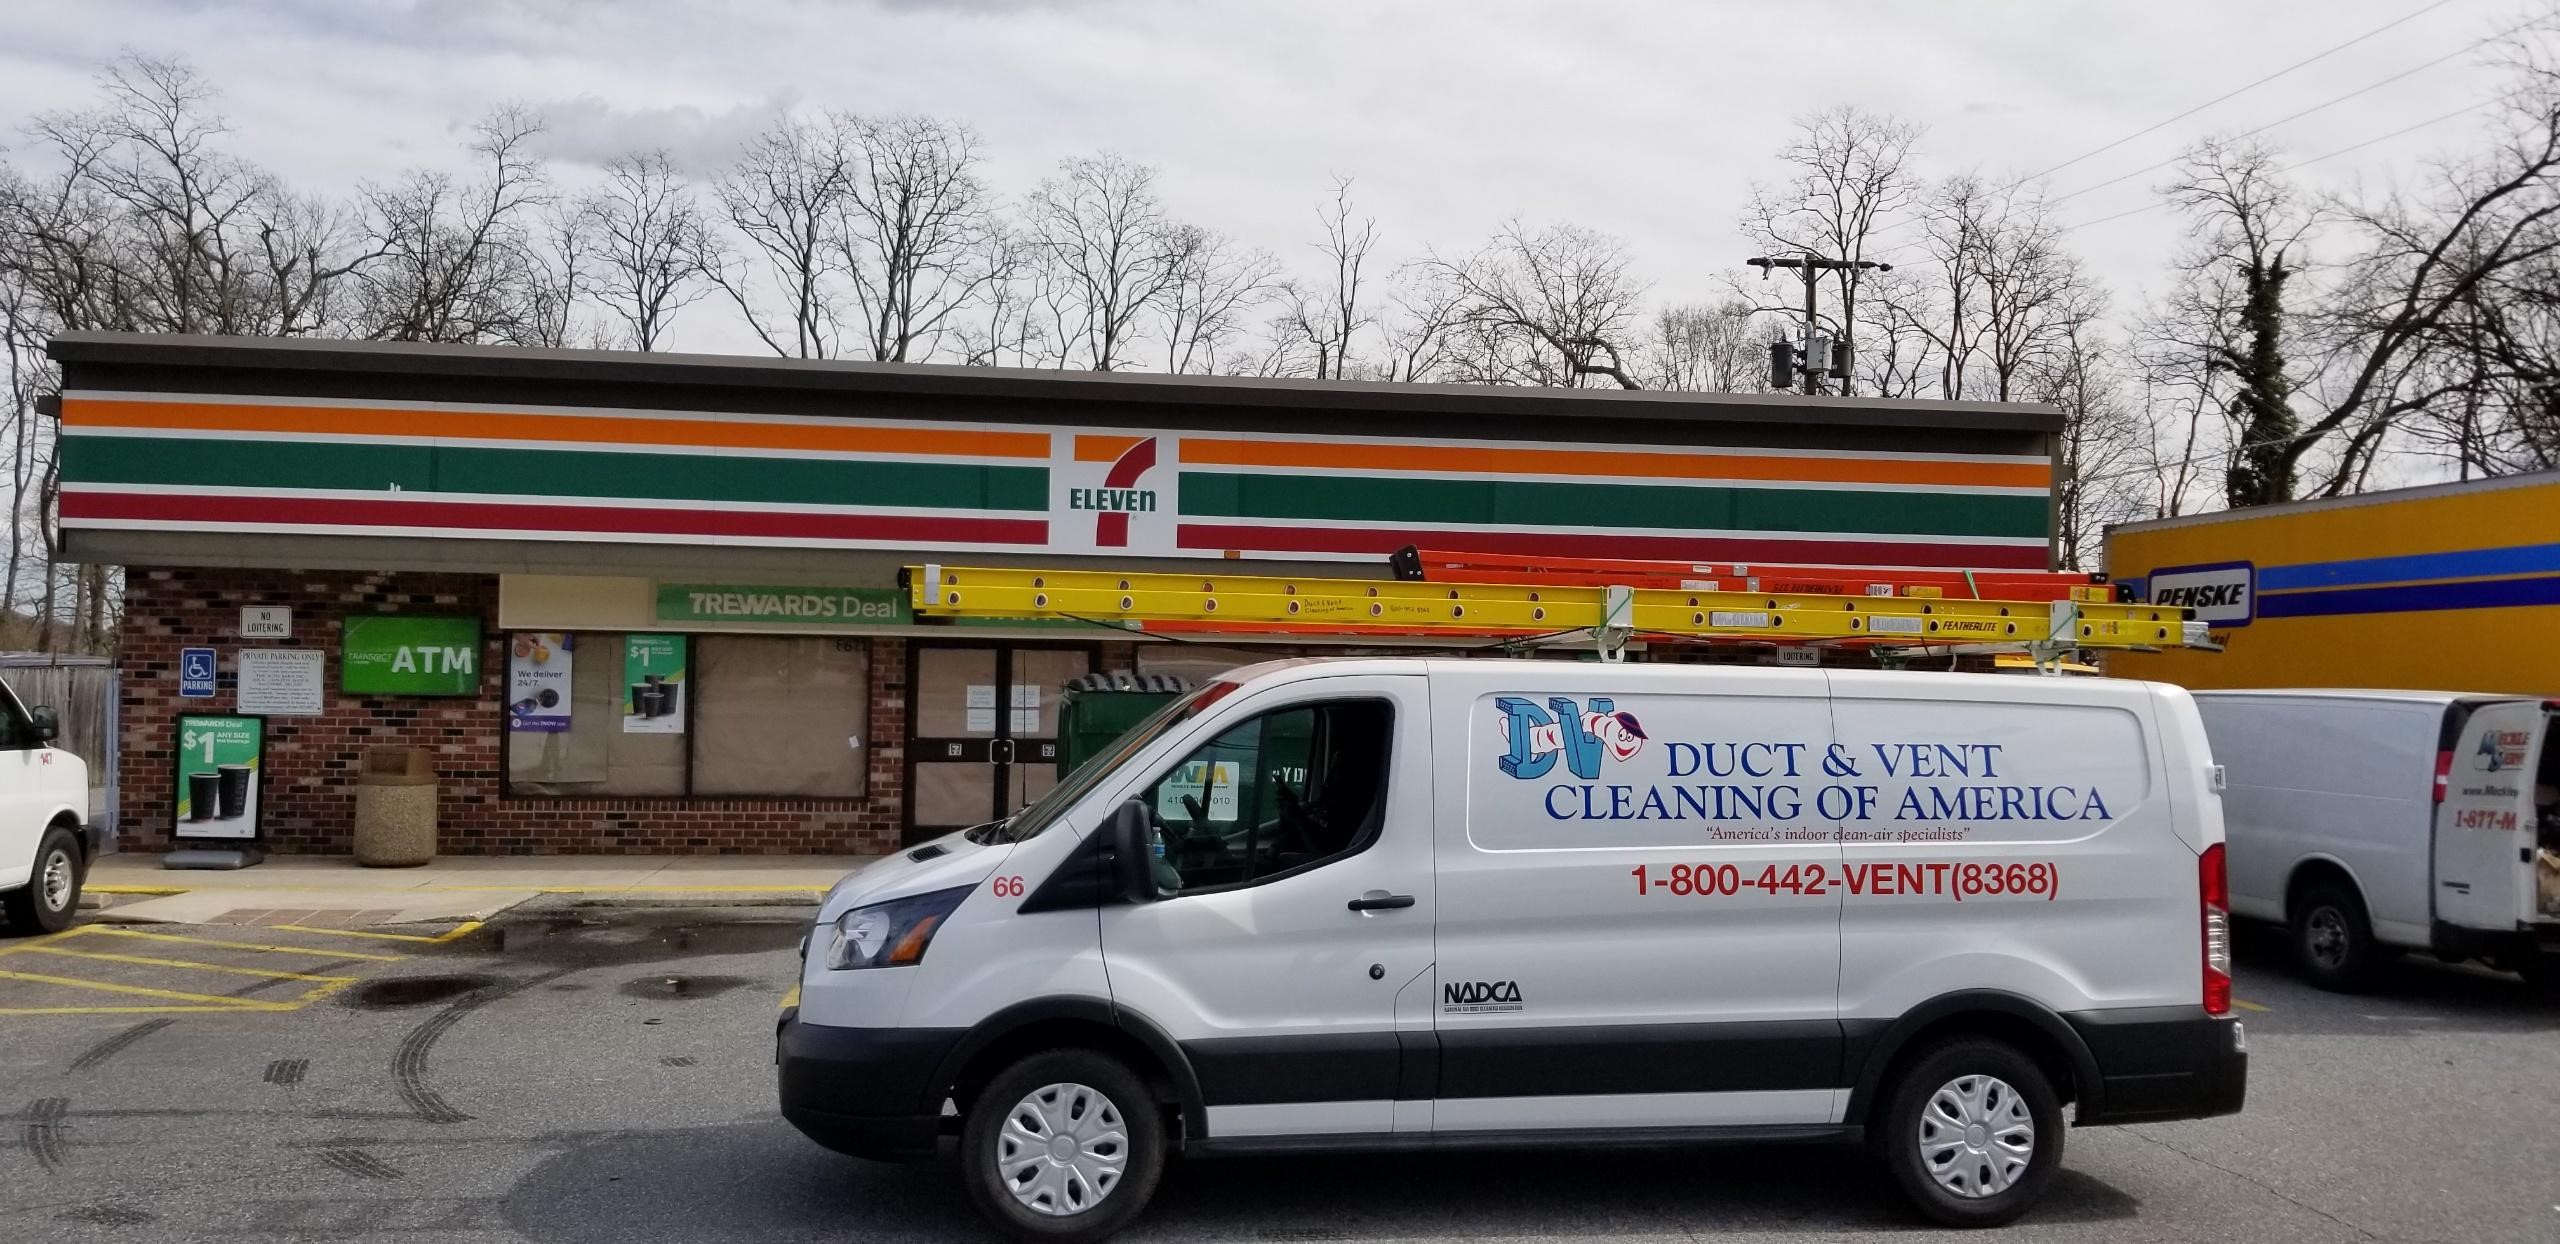 7-Eleven - Convenience Store Duct Cleaning - Towson, MD 7-Eleven.jpg